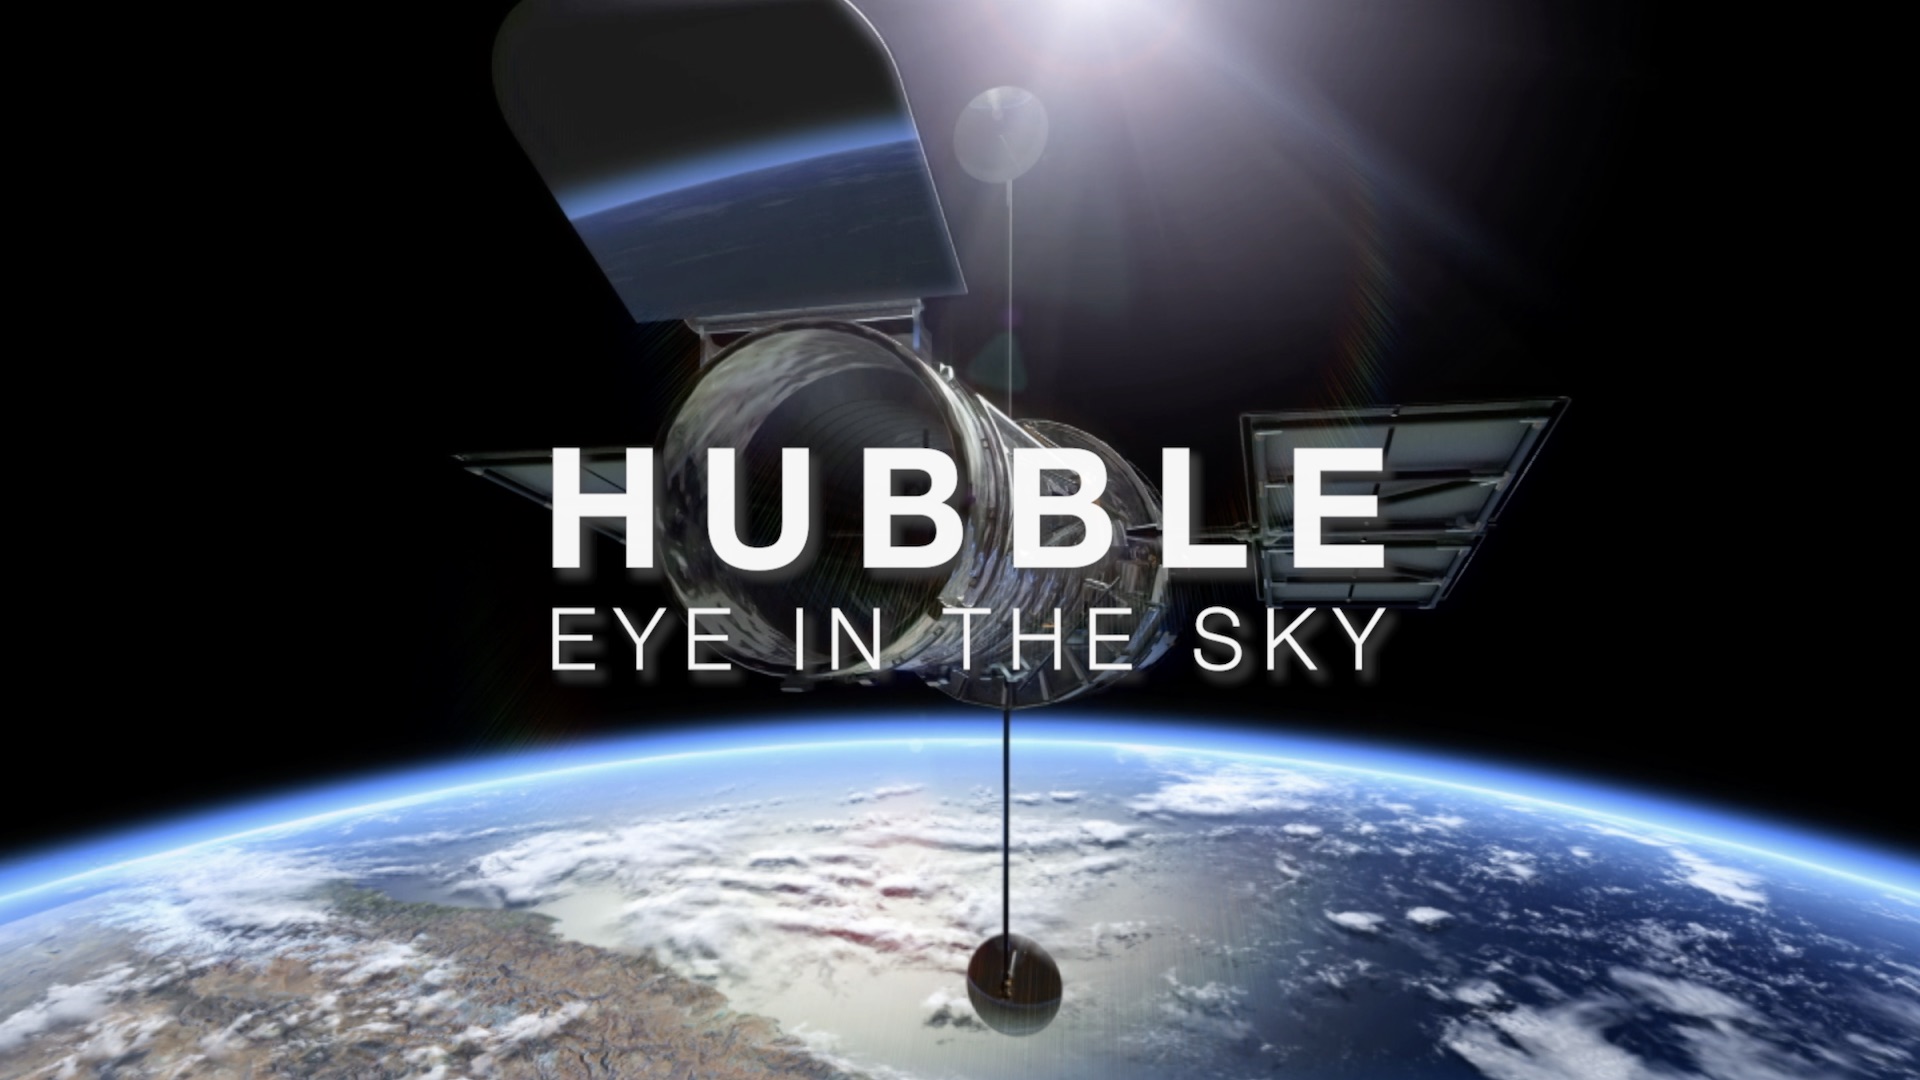 Preview Image for New Hubble Video Miniseries Goes Behind the Scenes of Our 